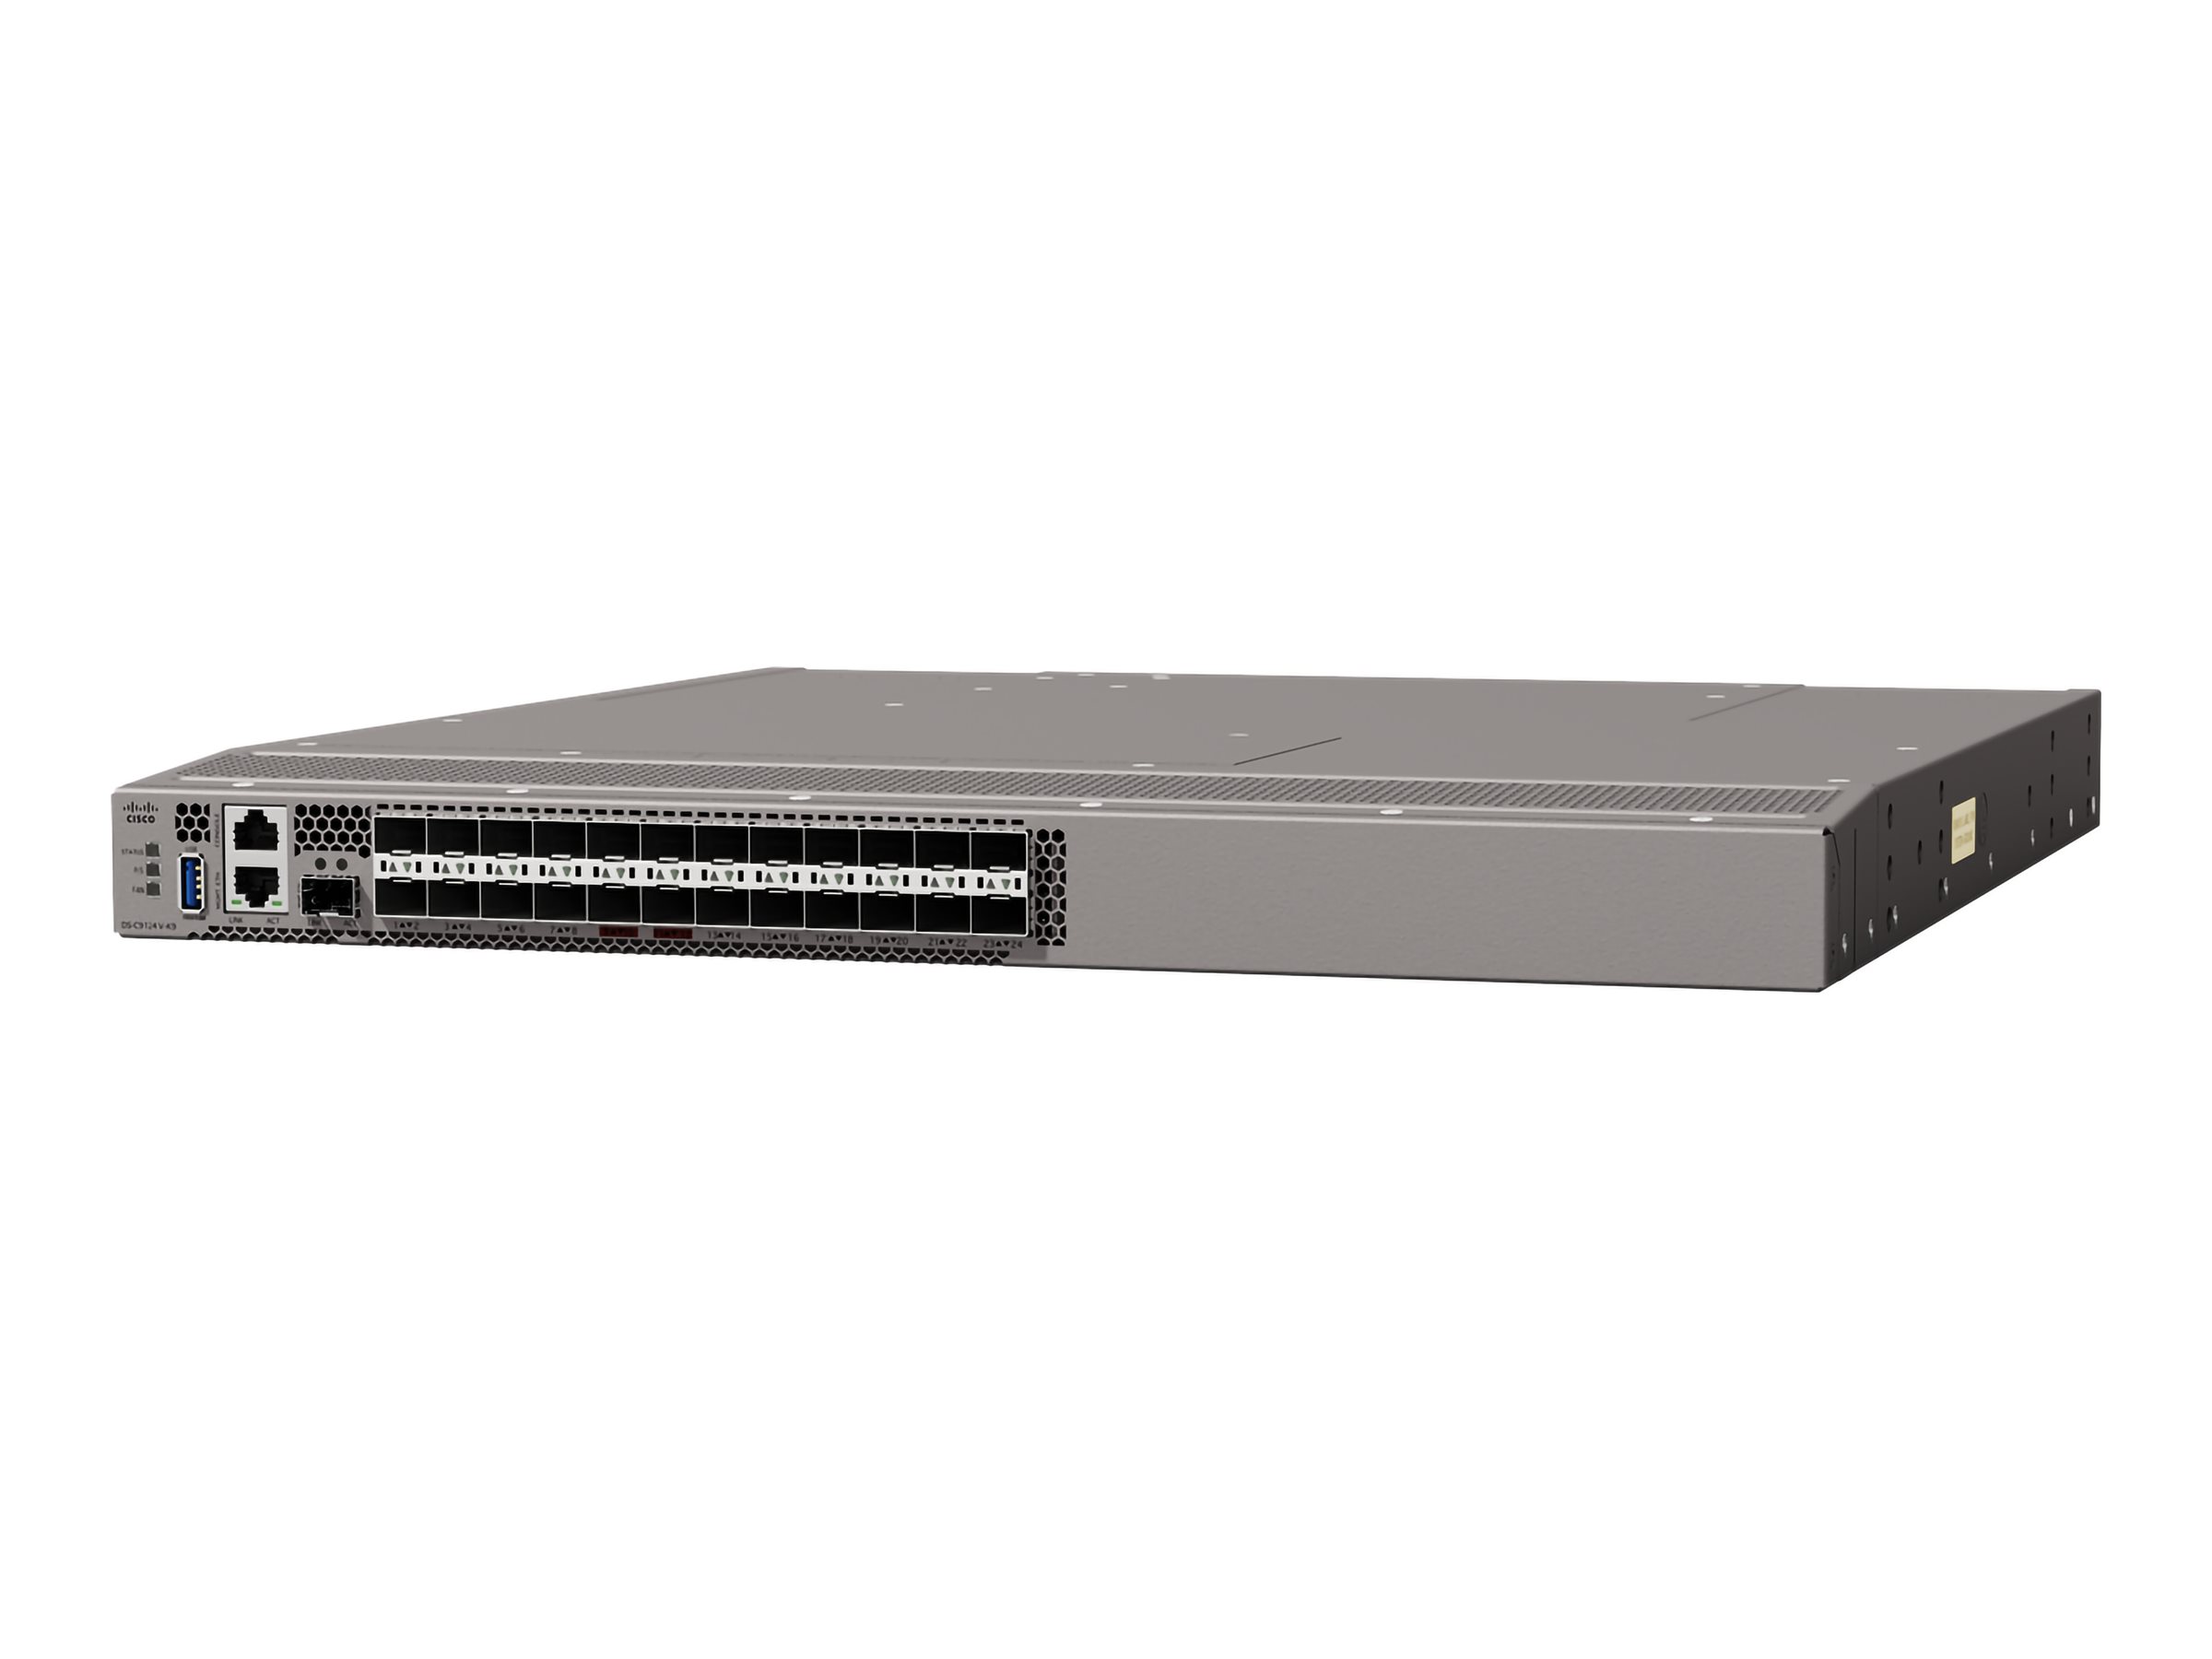 HPE SN6710C 64Gb 24/24 32Gb Short Wave SFP+ Fibre Channel v2 Switch - C-Series - Switch - managed - 24 x 64Gb Fibre Channel SFP+